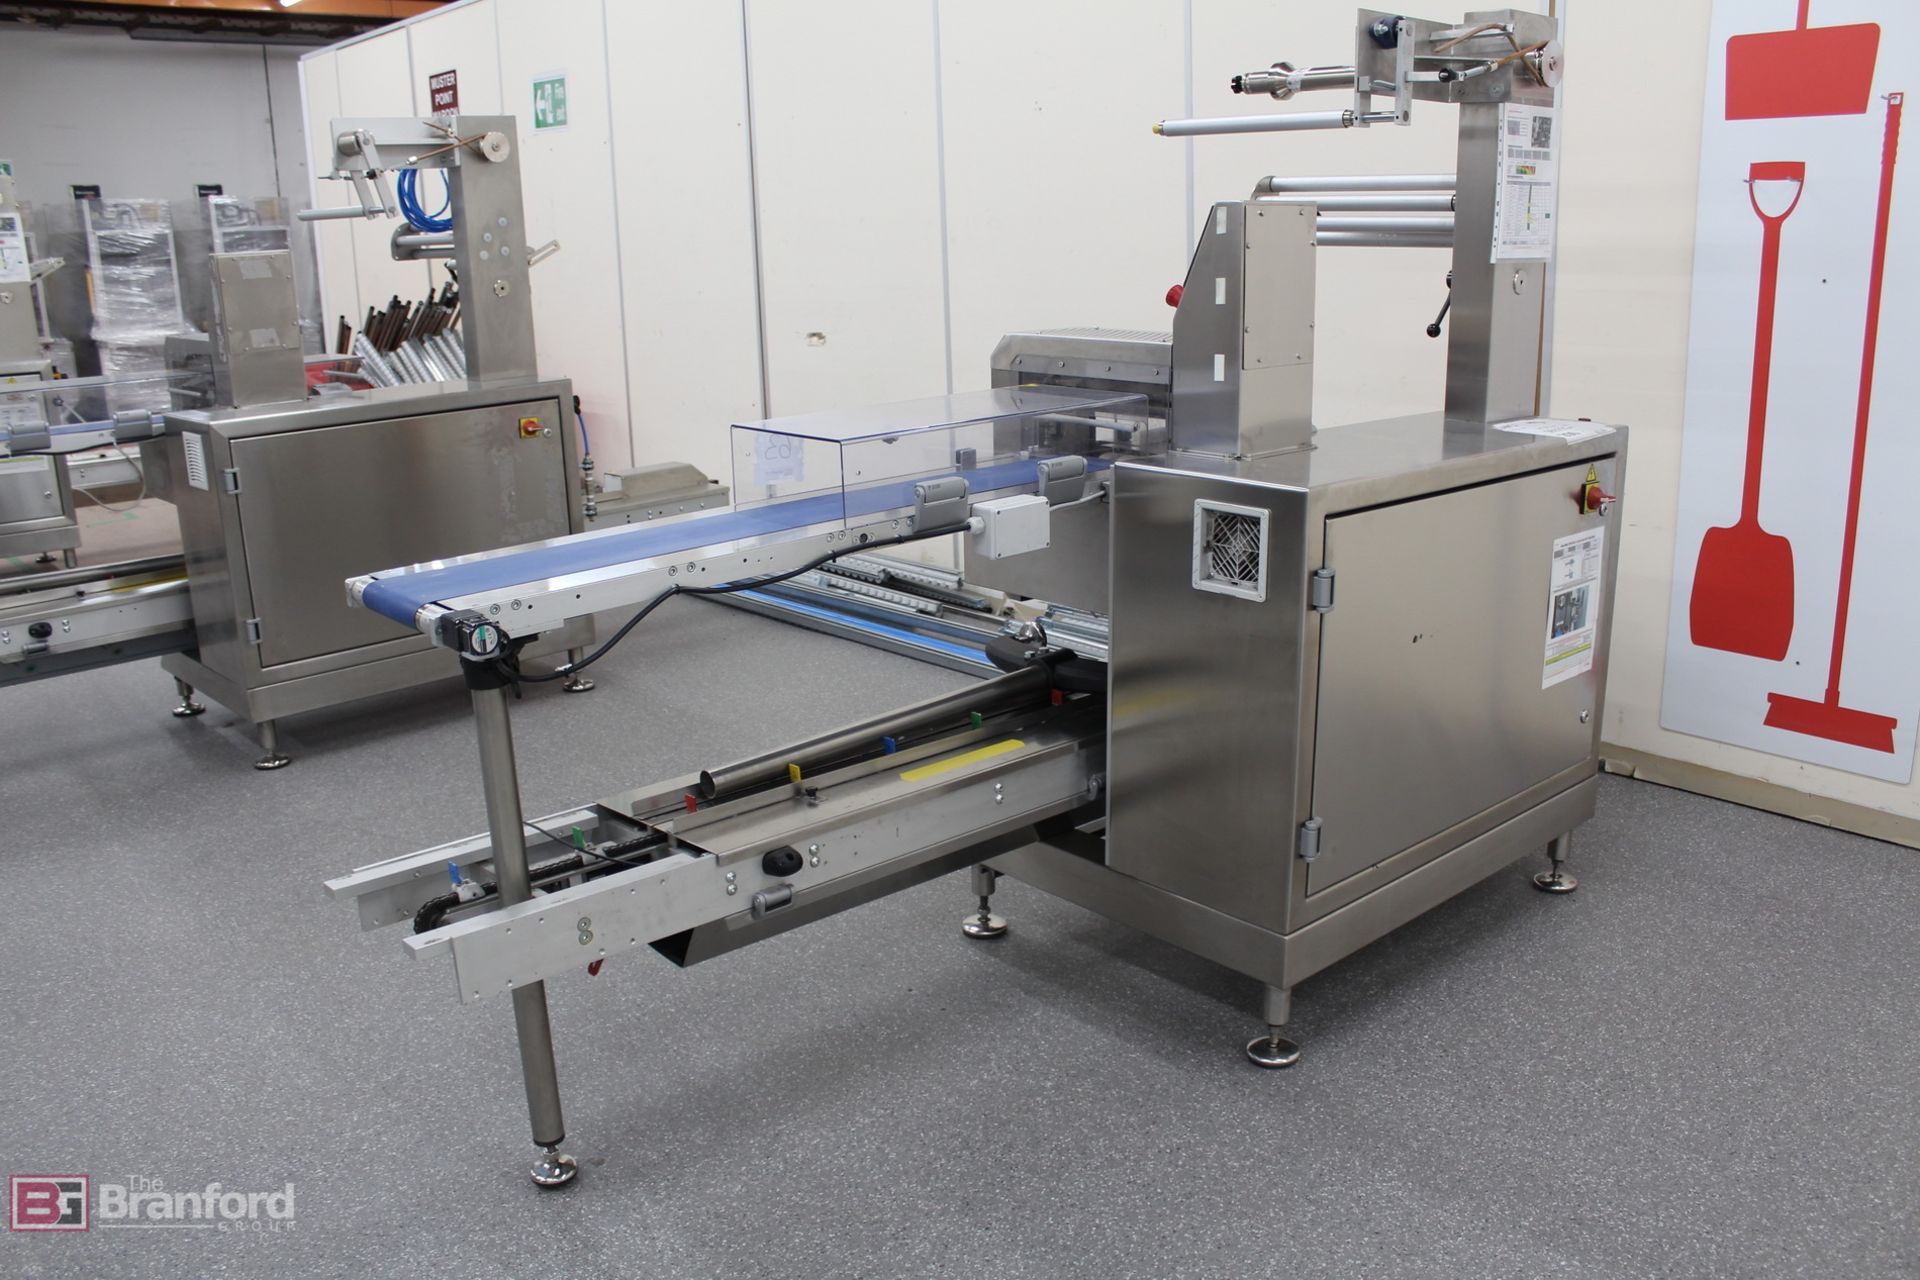 LMC/Tisomi LM450 Stainless Steel Wrapping Machine - Image 2 of 3